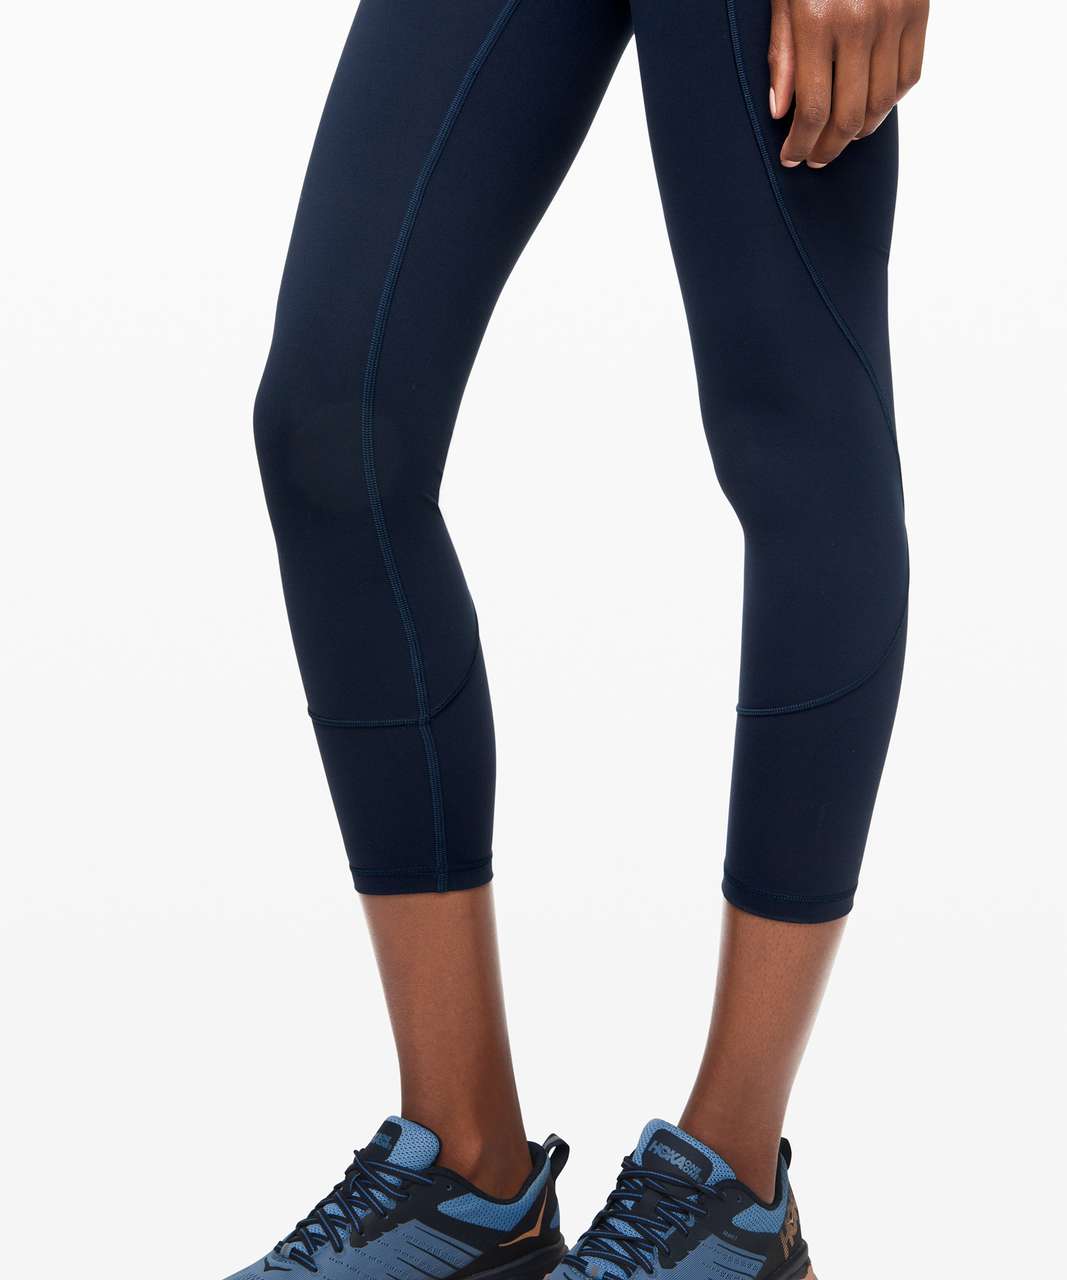 NWT Lululemon In Movement Tight Size 6 HR Utility Blue Everlux 25